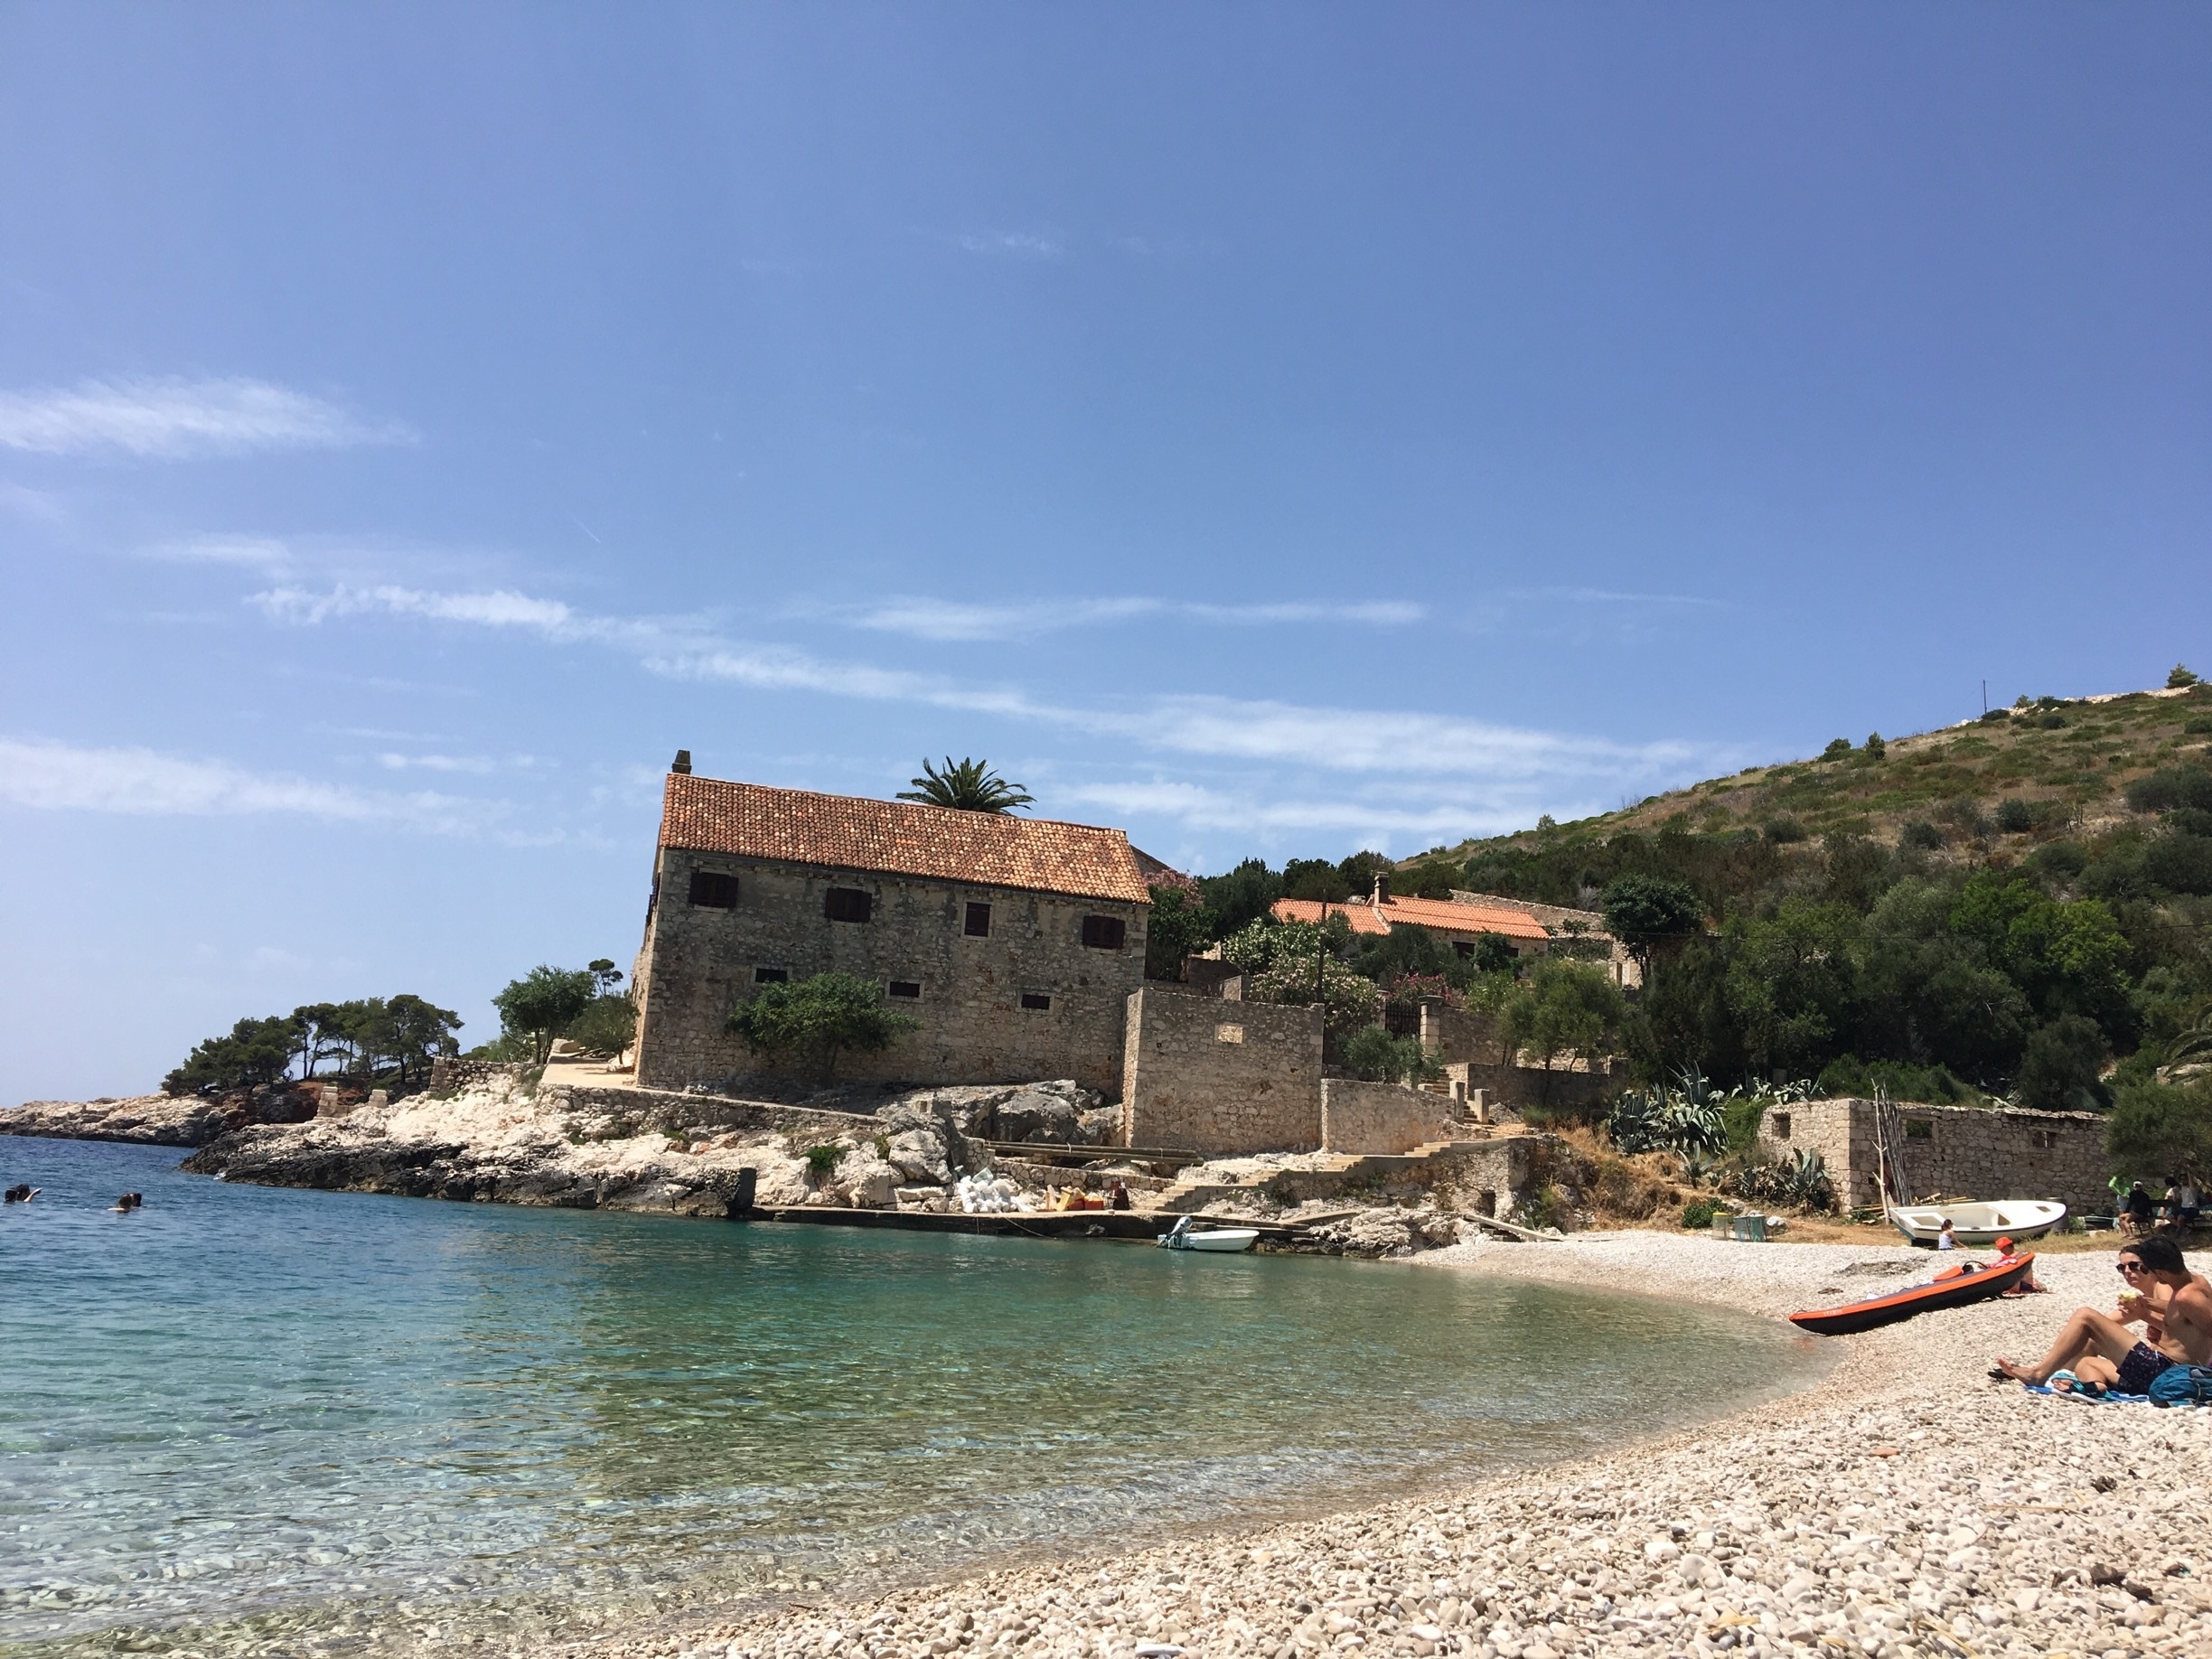 Scooter excursion to the beautiful Dubovica beach, secluded 8km from the Hvar Town crowds
#lifeatexpedia